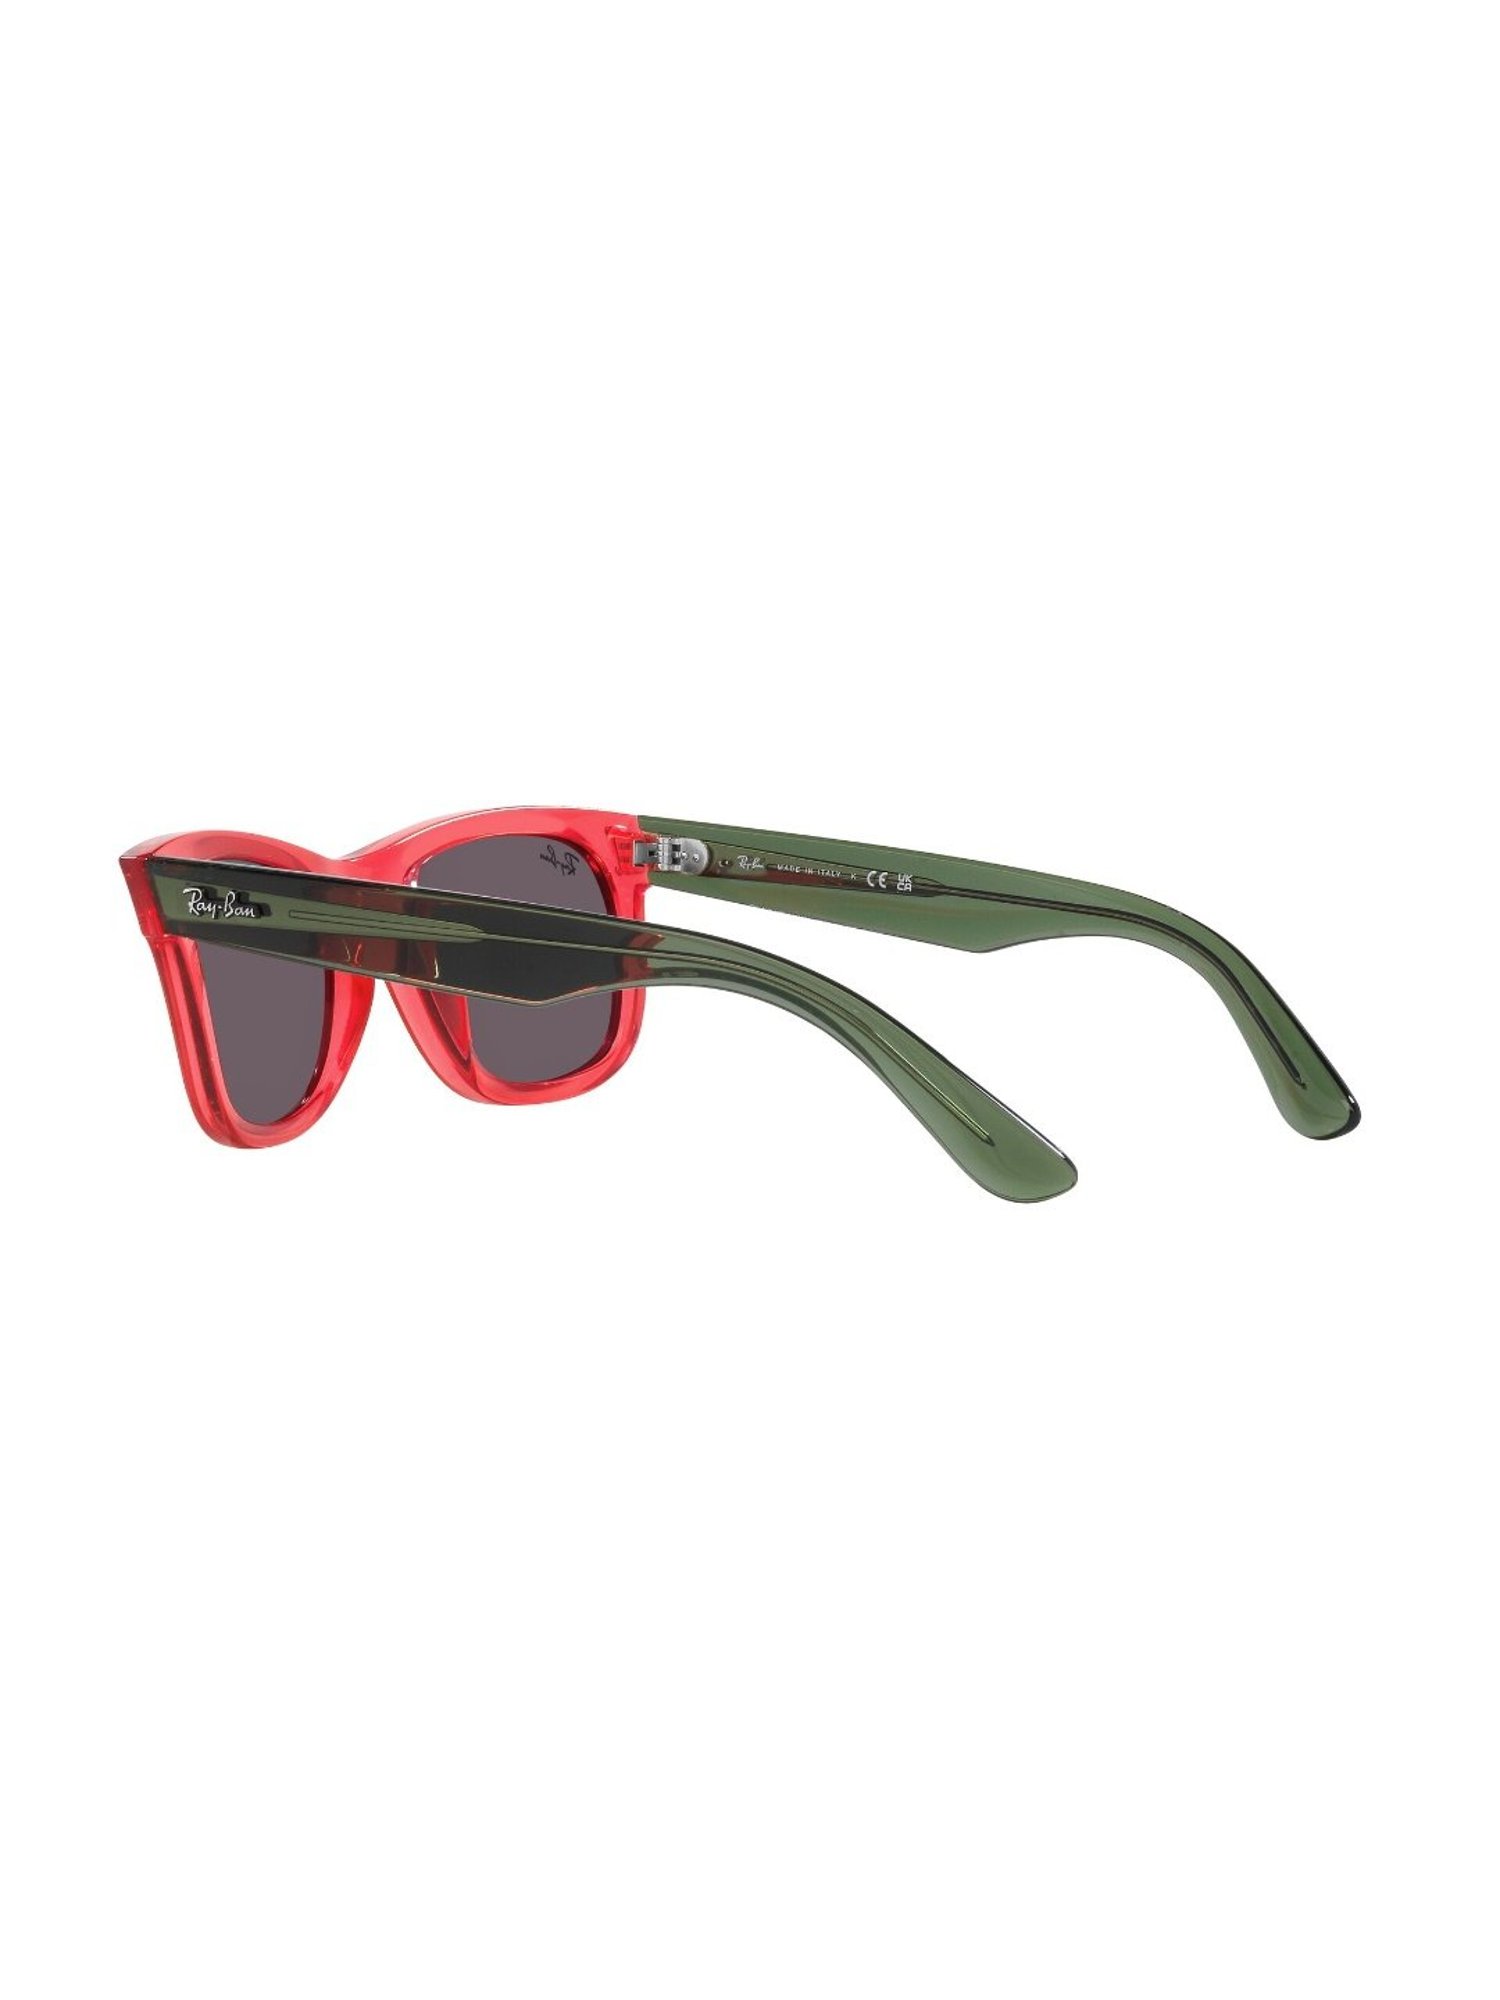 Red Sunglasses - Buy Red Sunglasses Online in India